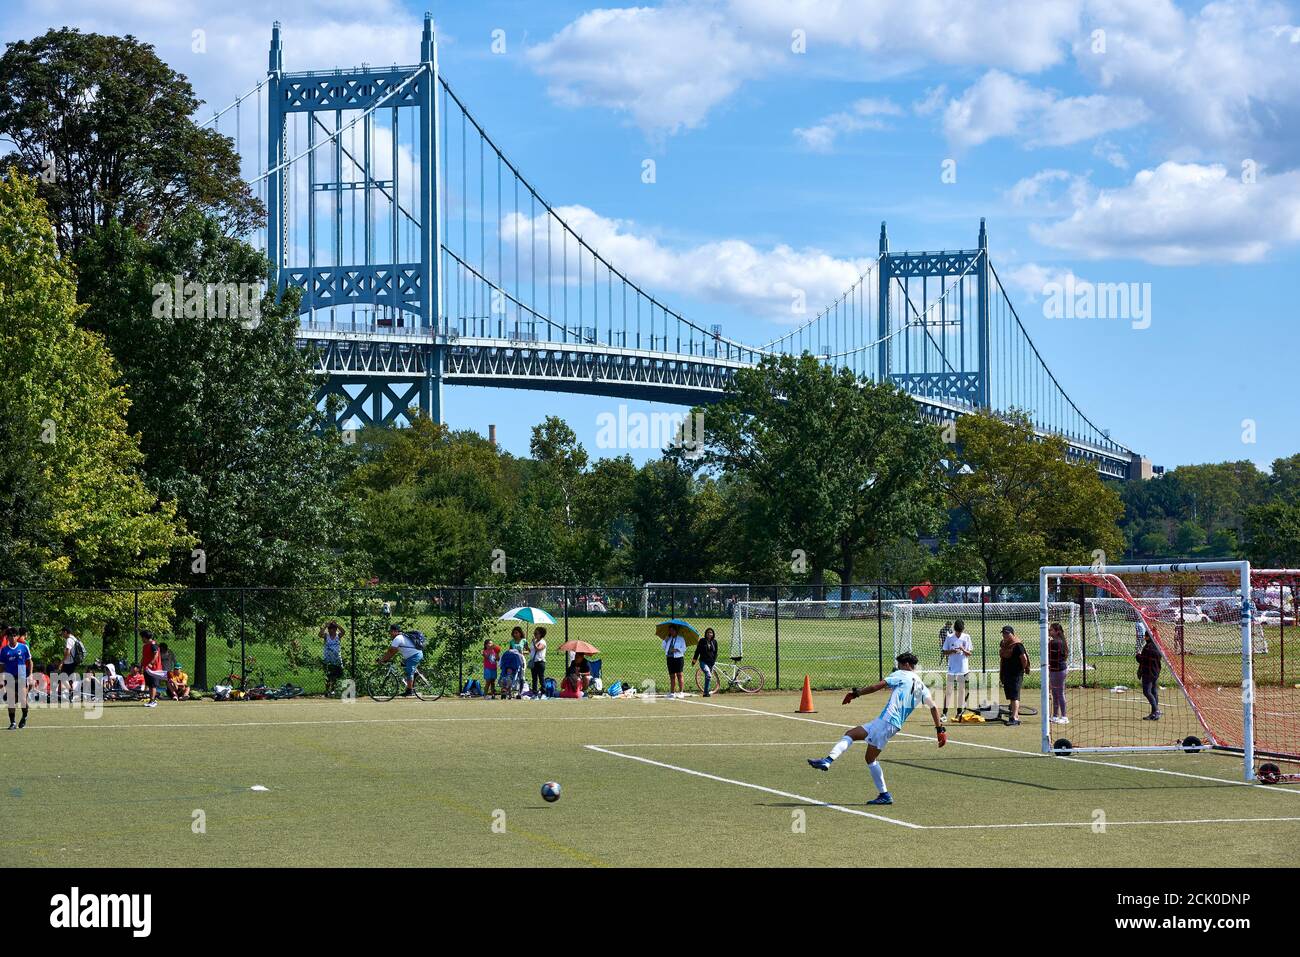 WARDS ISLAND, NY USA - SEPTEMBER 12 2020: Athletes playing soccer on the fields at Wards Island, NYC, with the Robert F. Kennedy Bridge in the backgro Stock Photo